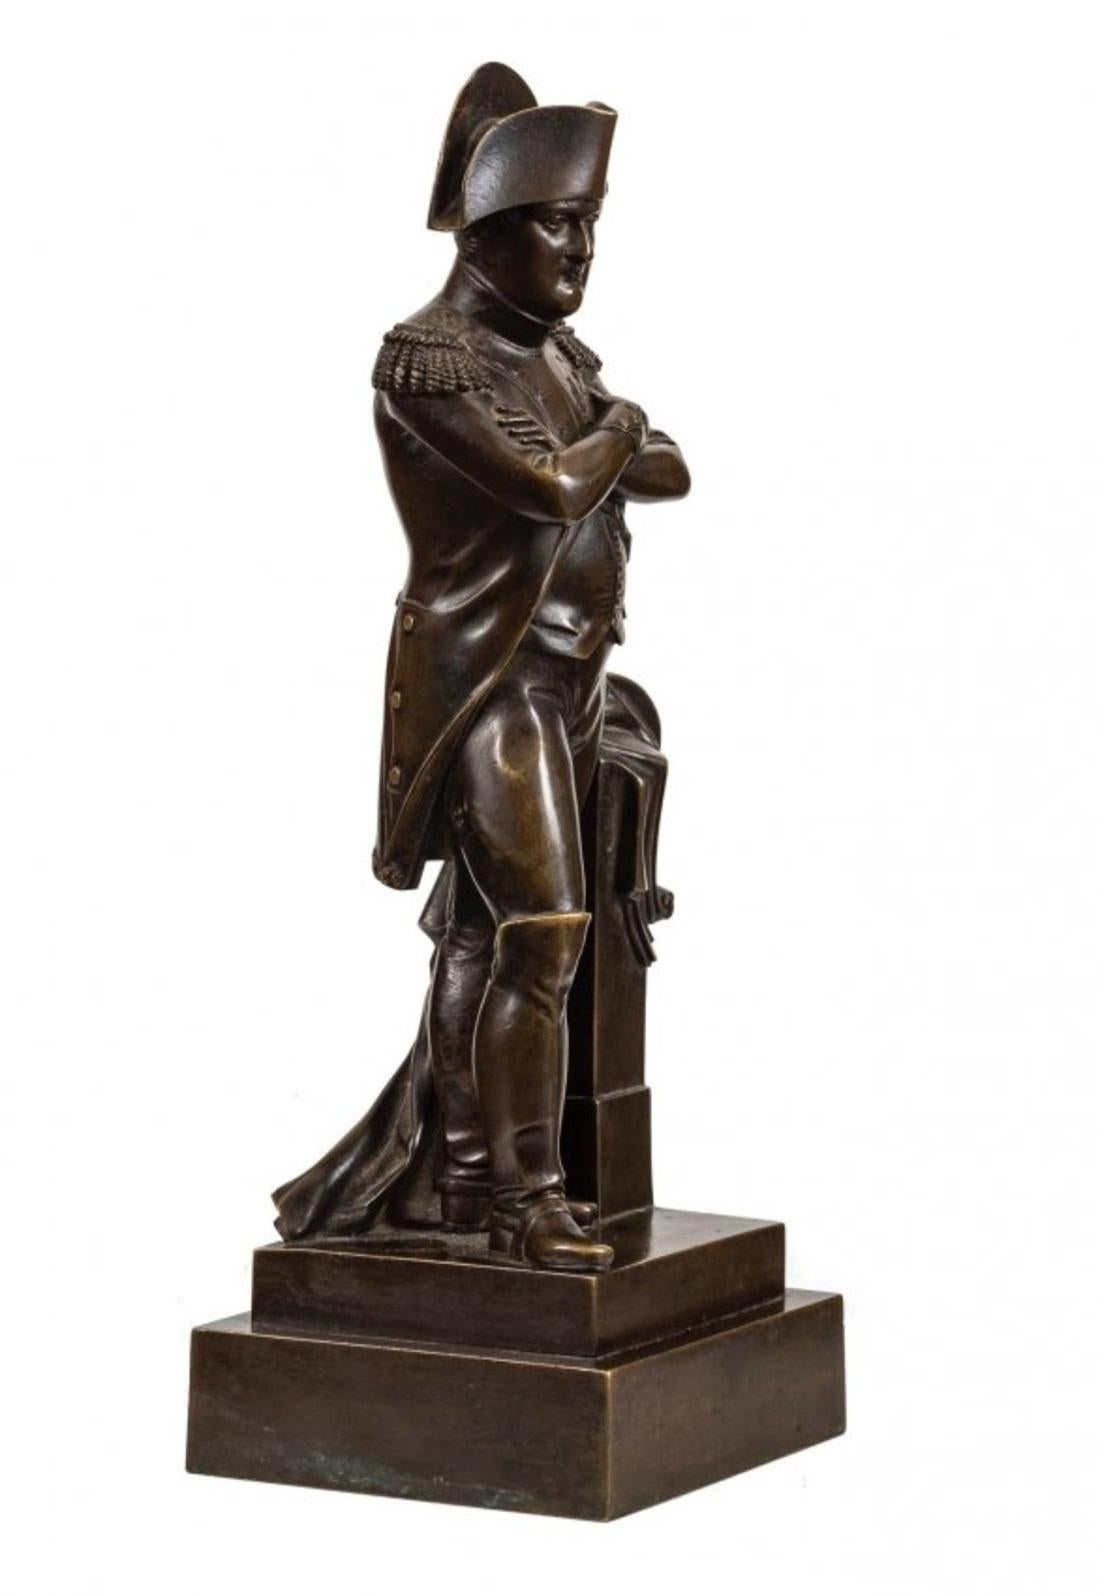 Patinated bronze sculpture of Napoleon
19th century. Unsigned.
Bronze, brown patina
Measures: Height 10 1/4 inches (26.03 cm.)
Square base 3 1/2 by 3 1/2 in. (8.89 x 8.89 cm.)
Provenance: Doyle New York, Belle Epoque, Sale 0306041 - Lot 511.
  